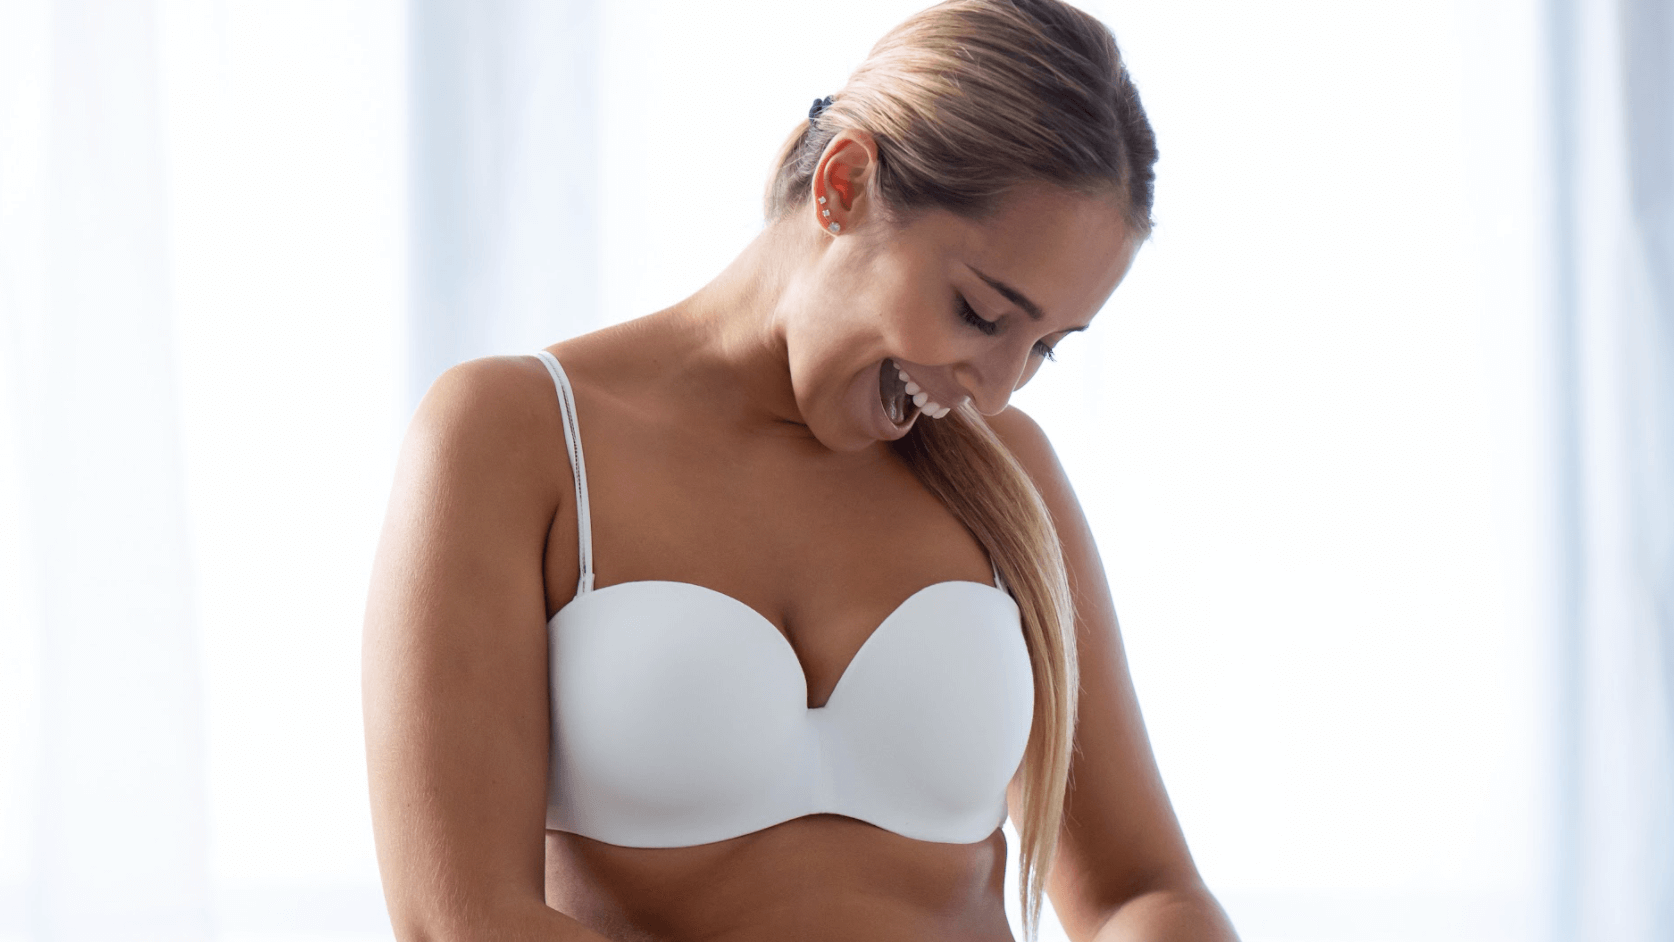 How to Choose the Best Breast Implants for Your Body Type  Implants breast,  Breast implants sizes, Breast augmentation